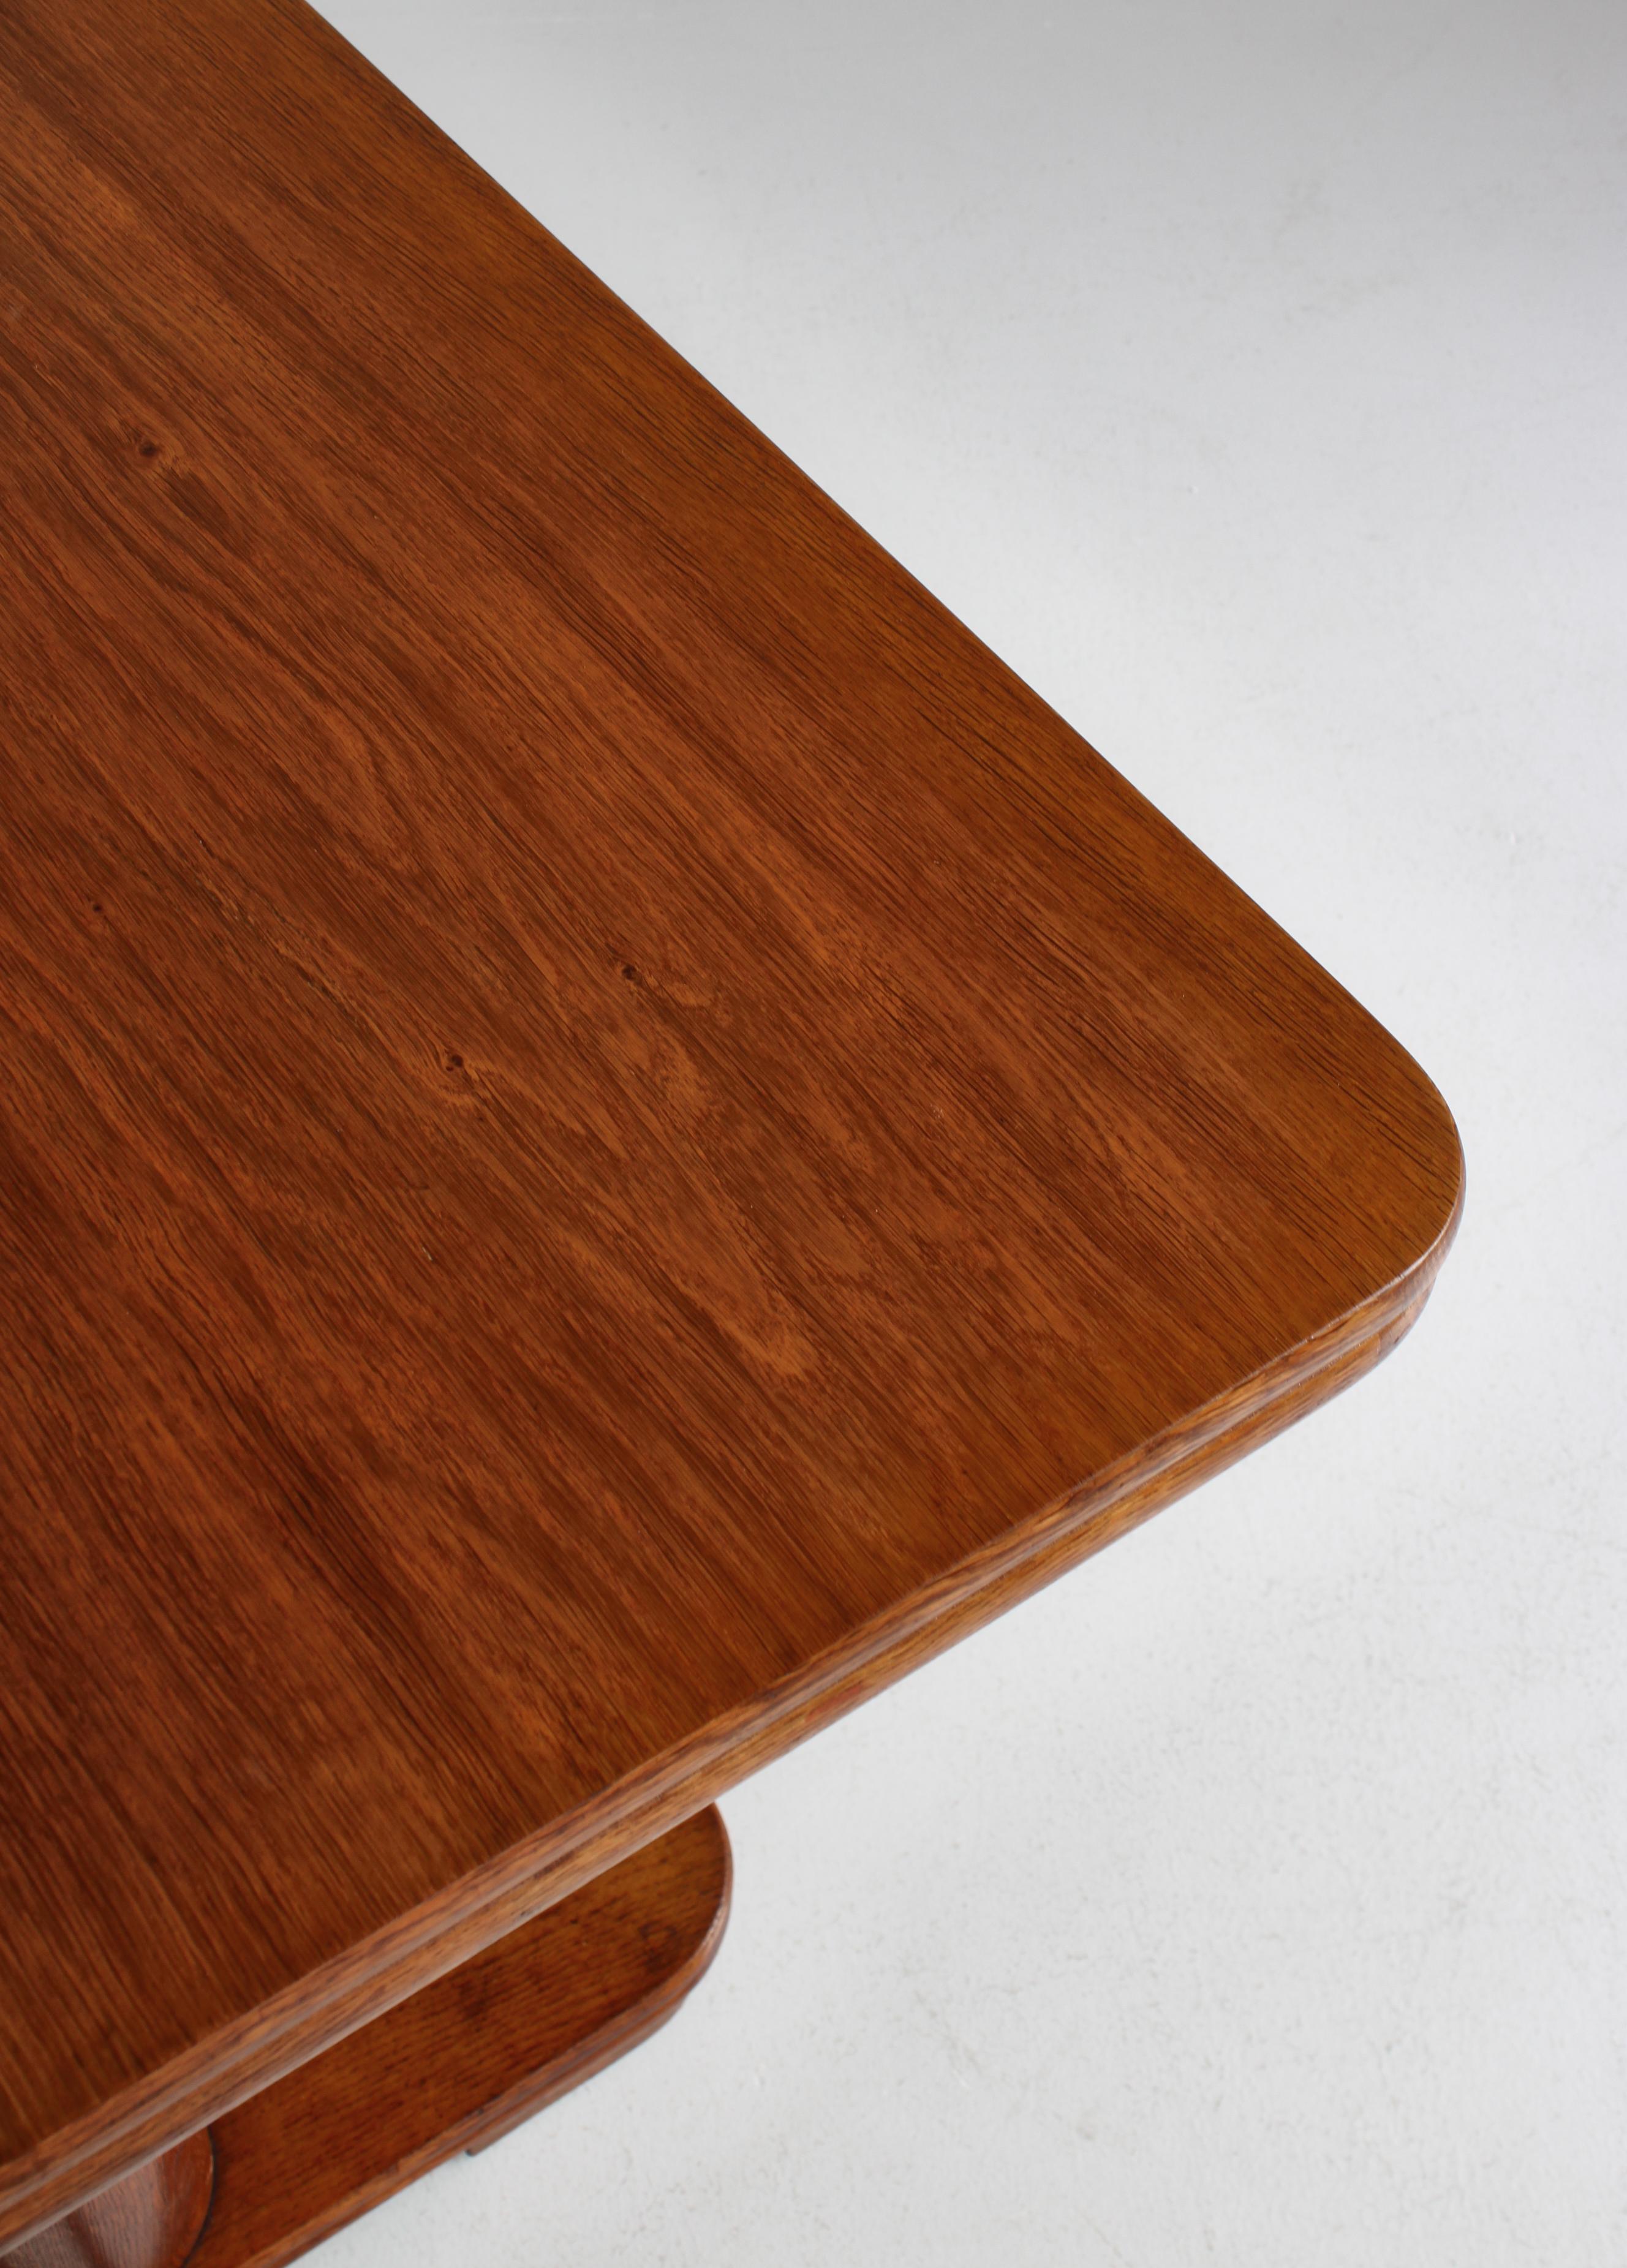 Art Deco Table by Danish Cabinetmaker in Patinated Oak, 1930s For Sale 6